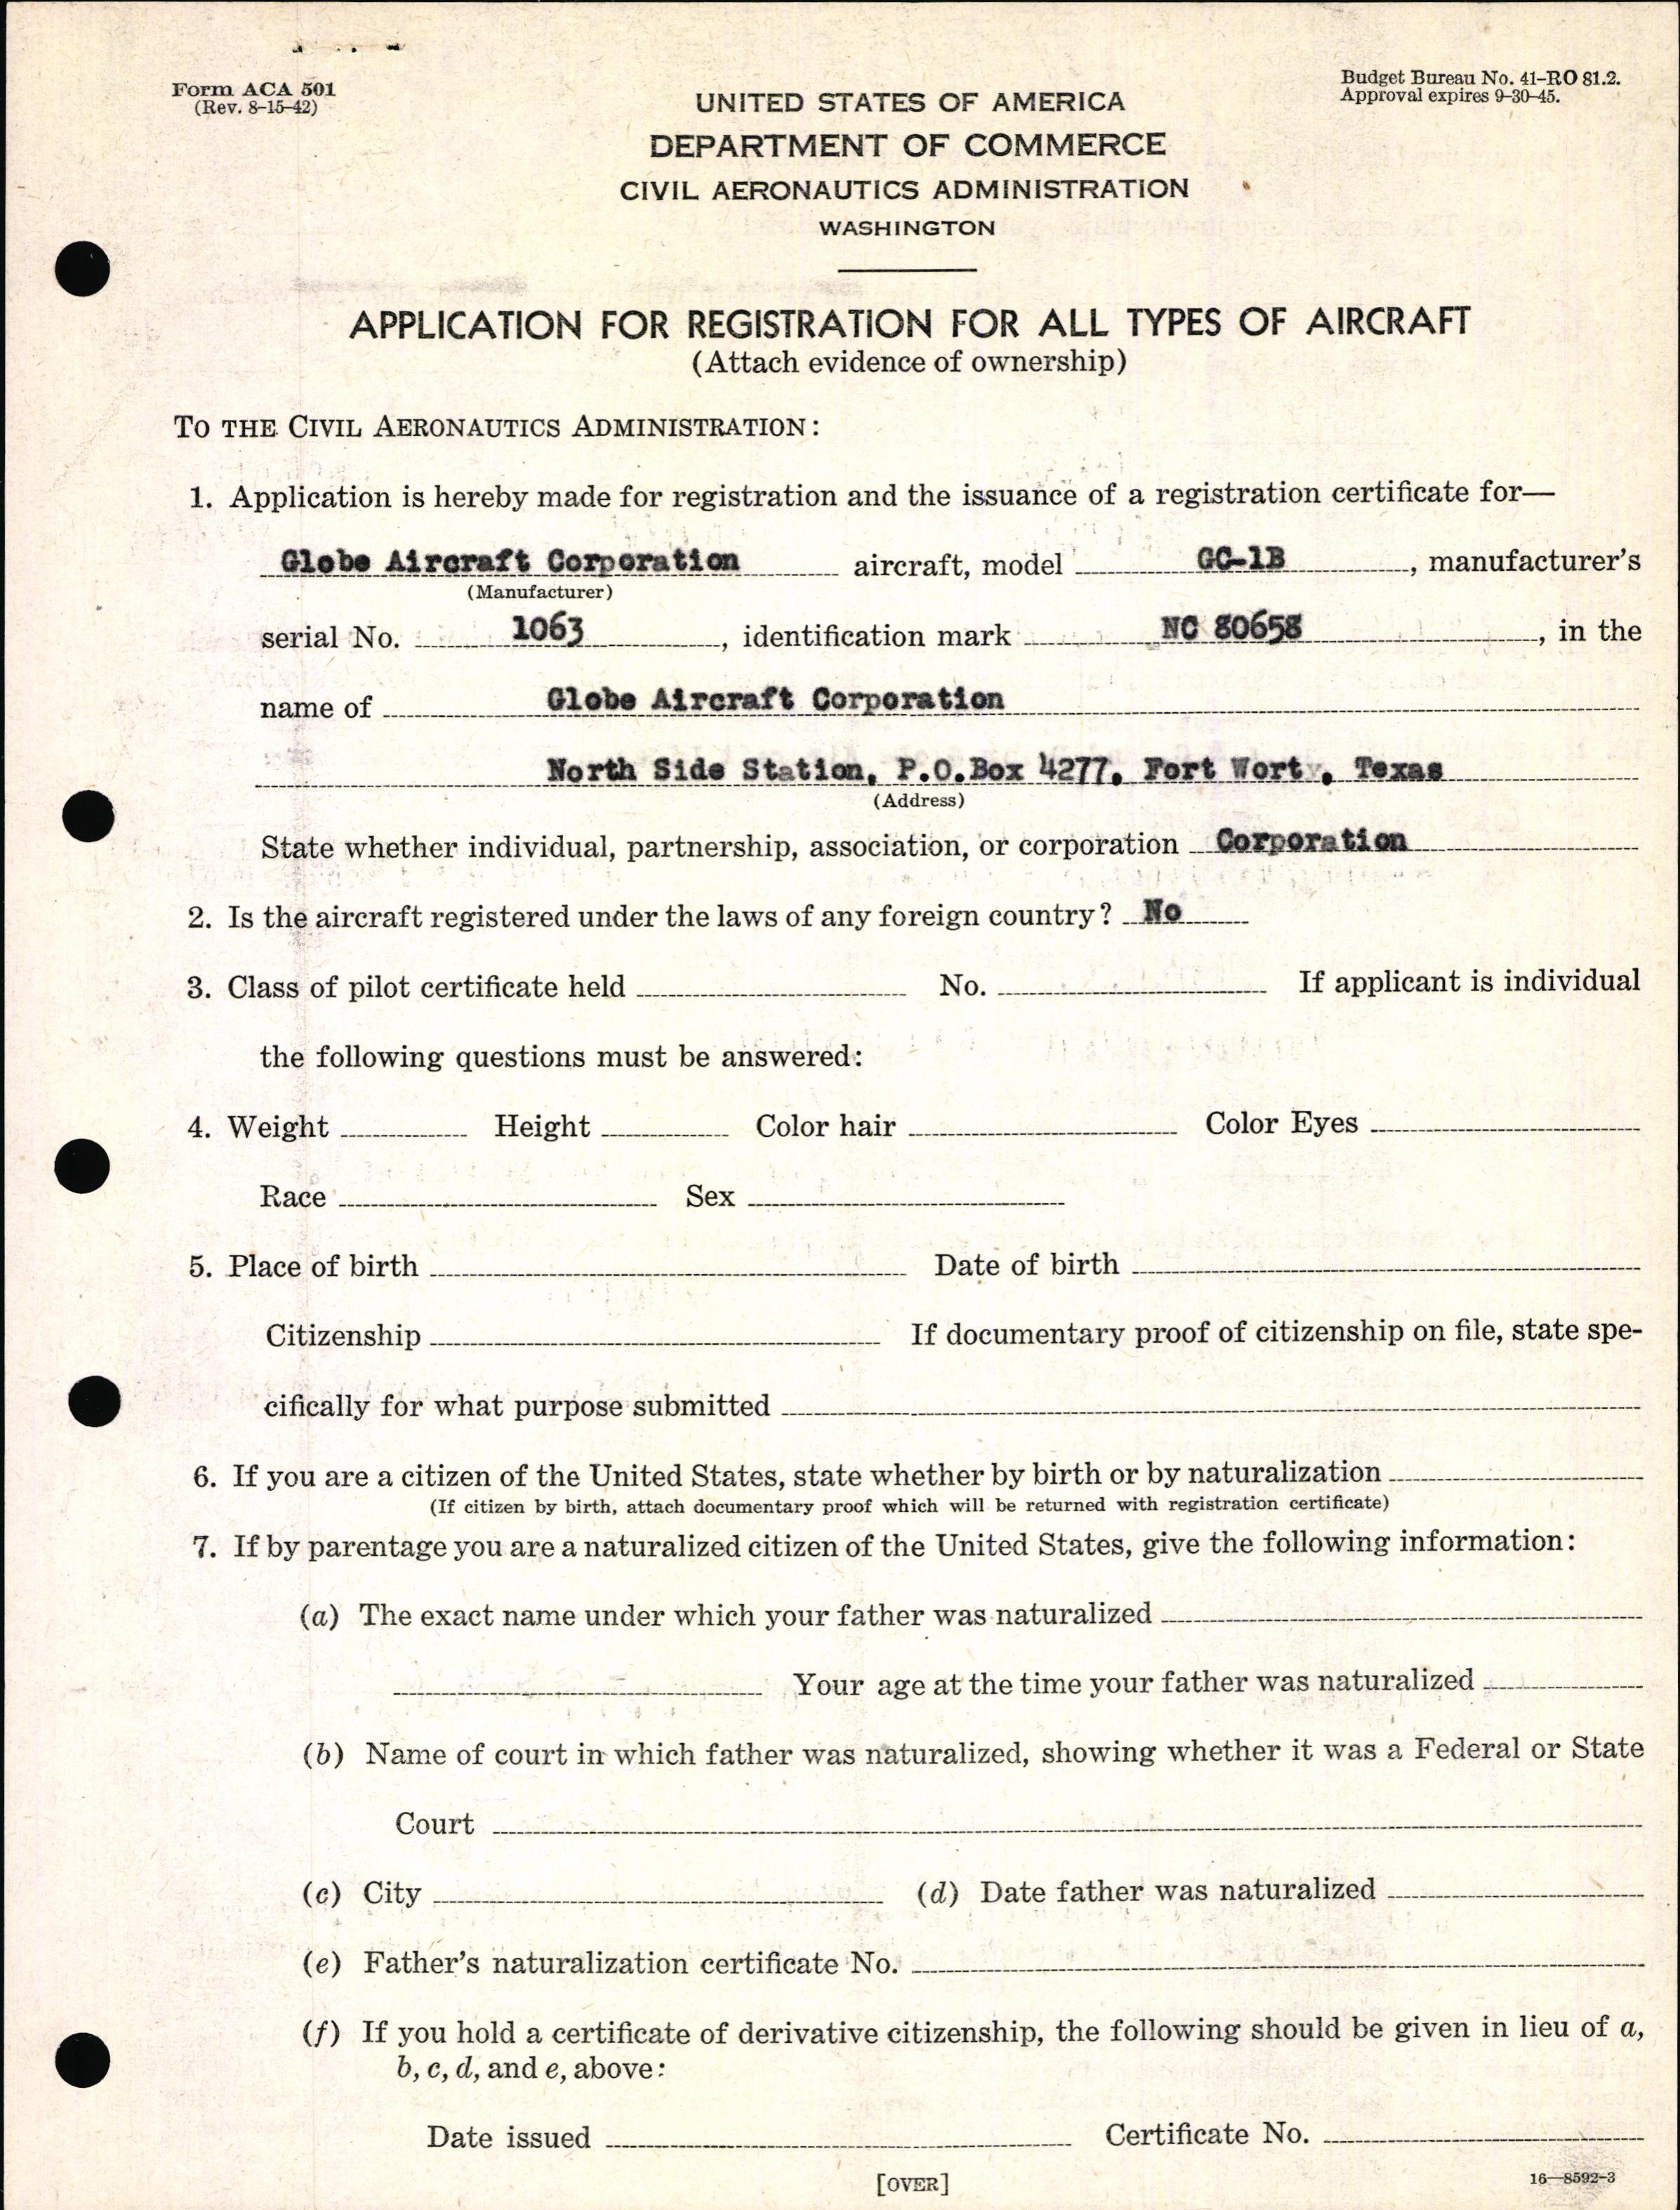 Sample page 3 from AirCorps Library document: Technical Information for Serial Number 1063